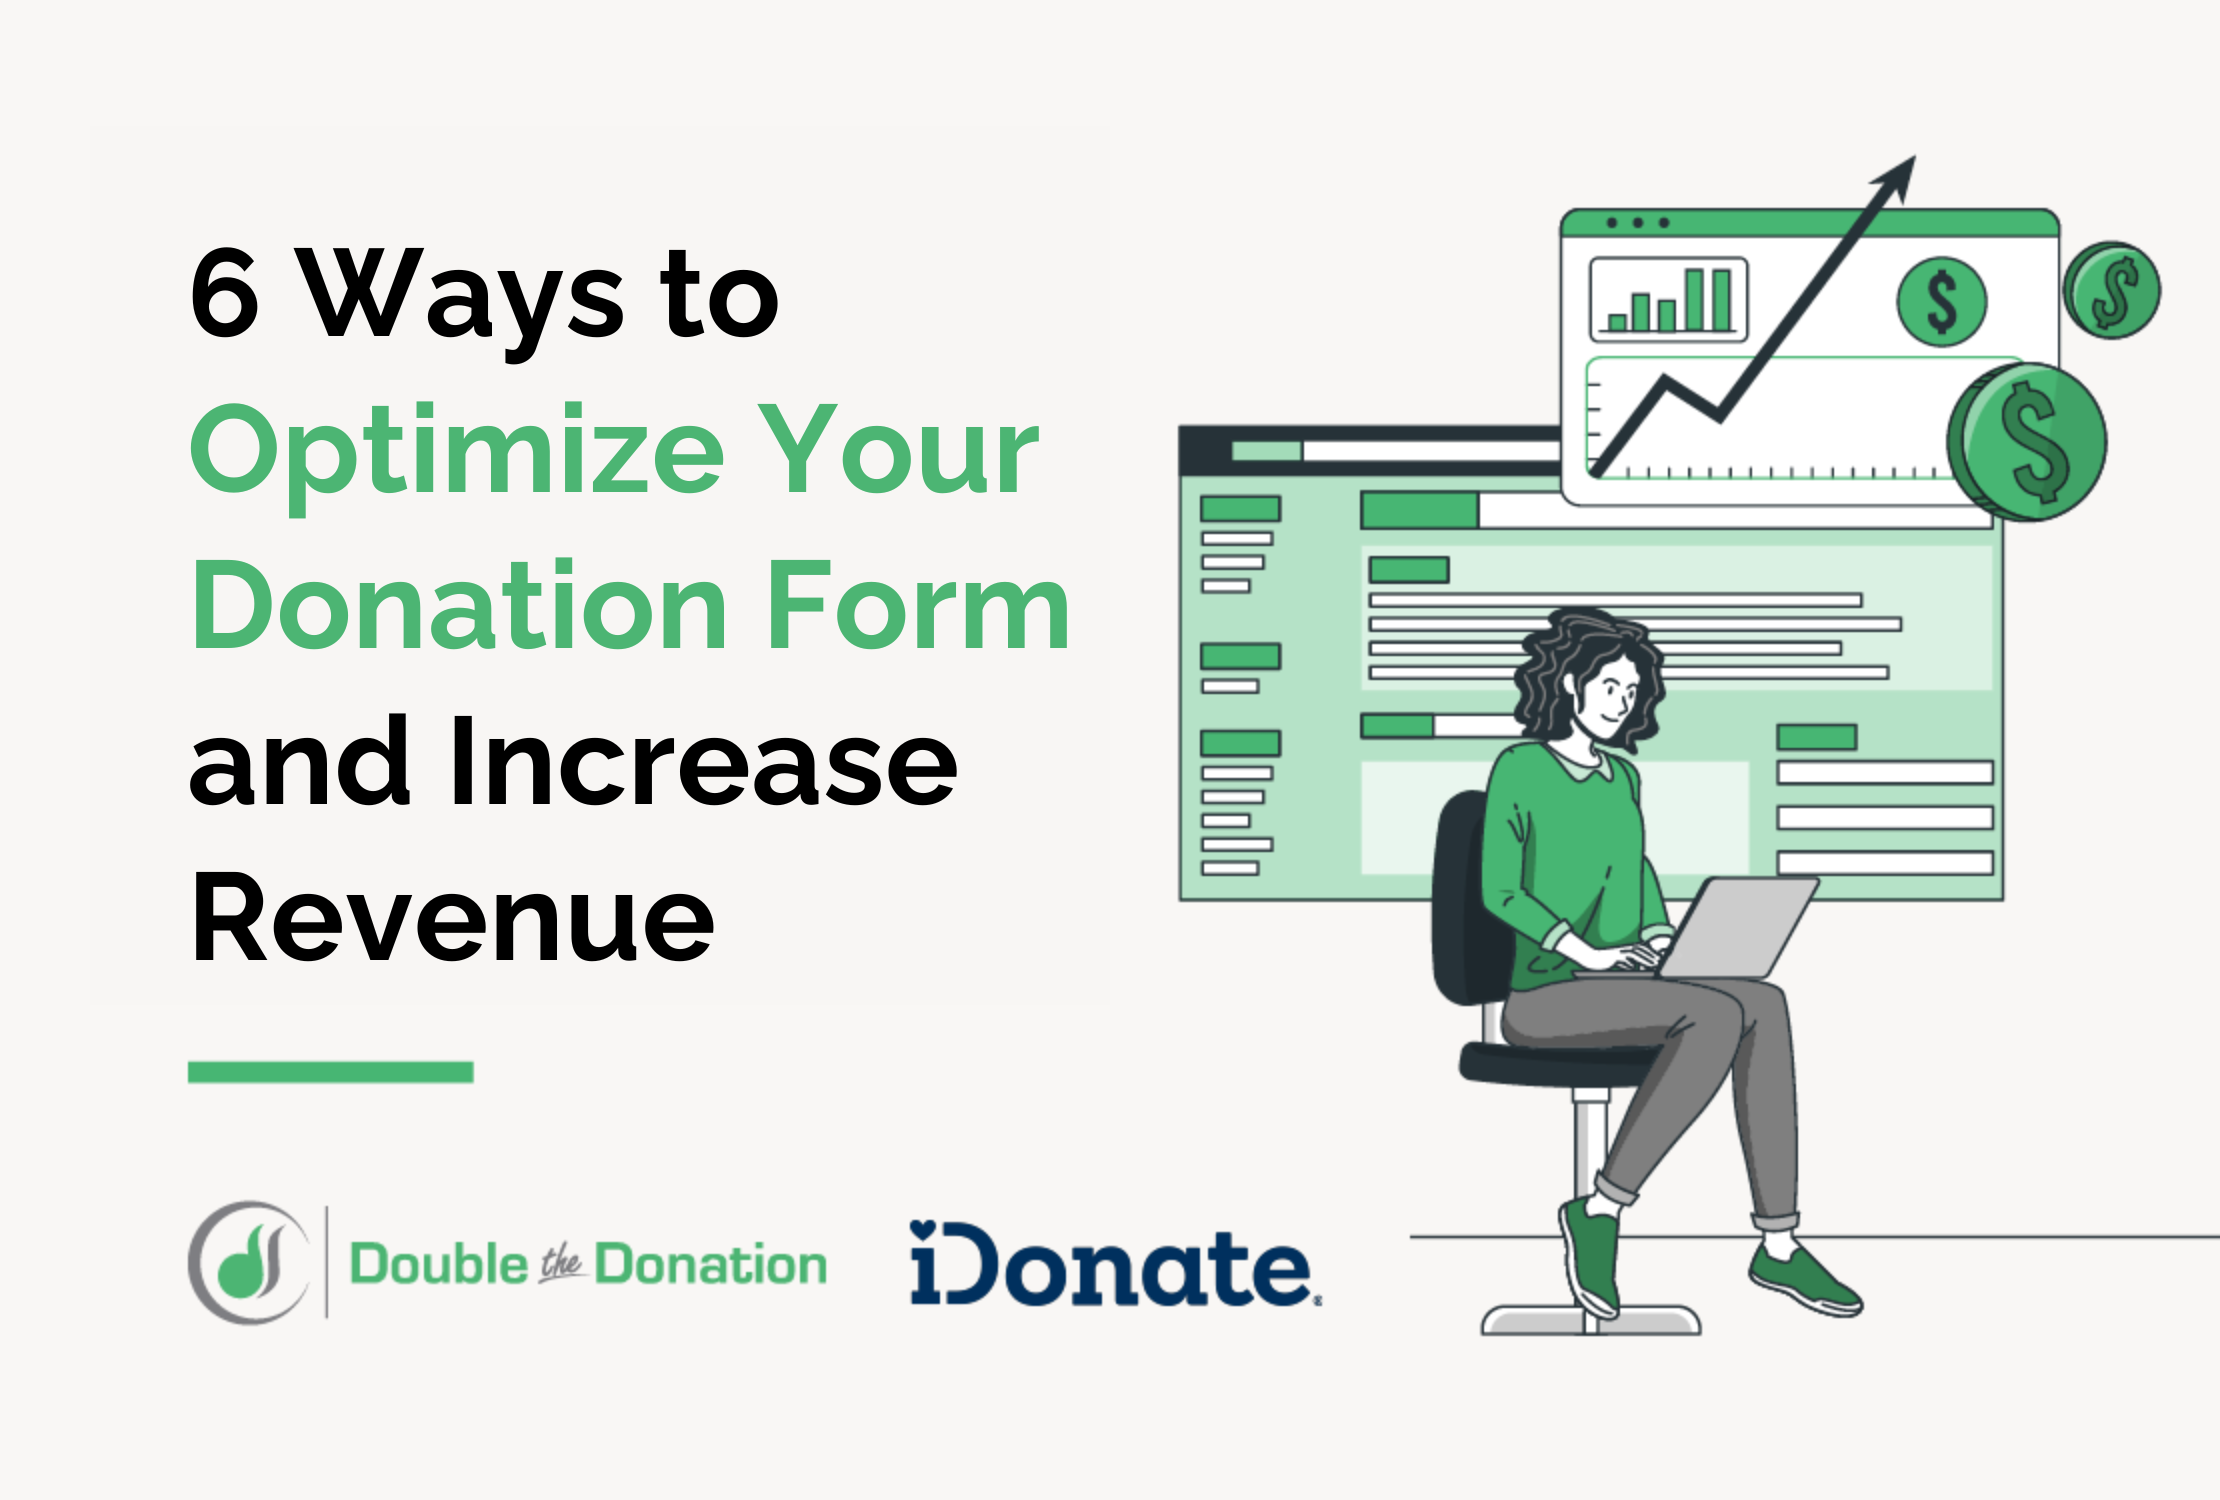 6 Ways to Optimize Your Donation Form and Increase Revenue